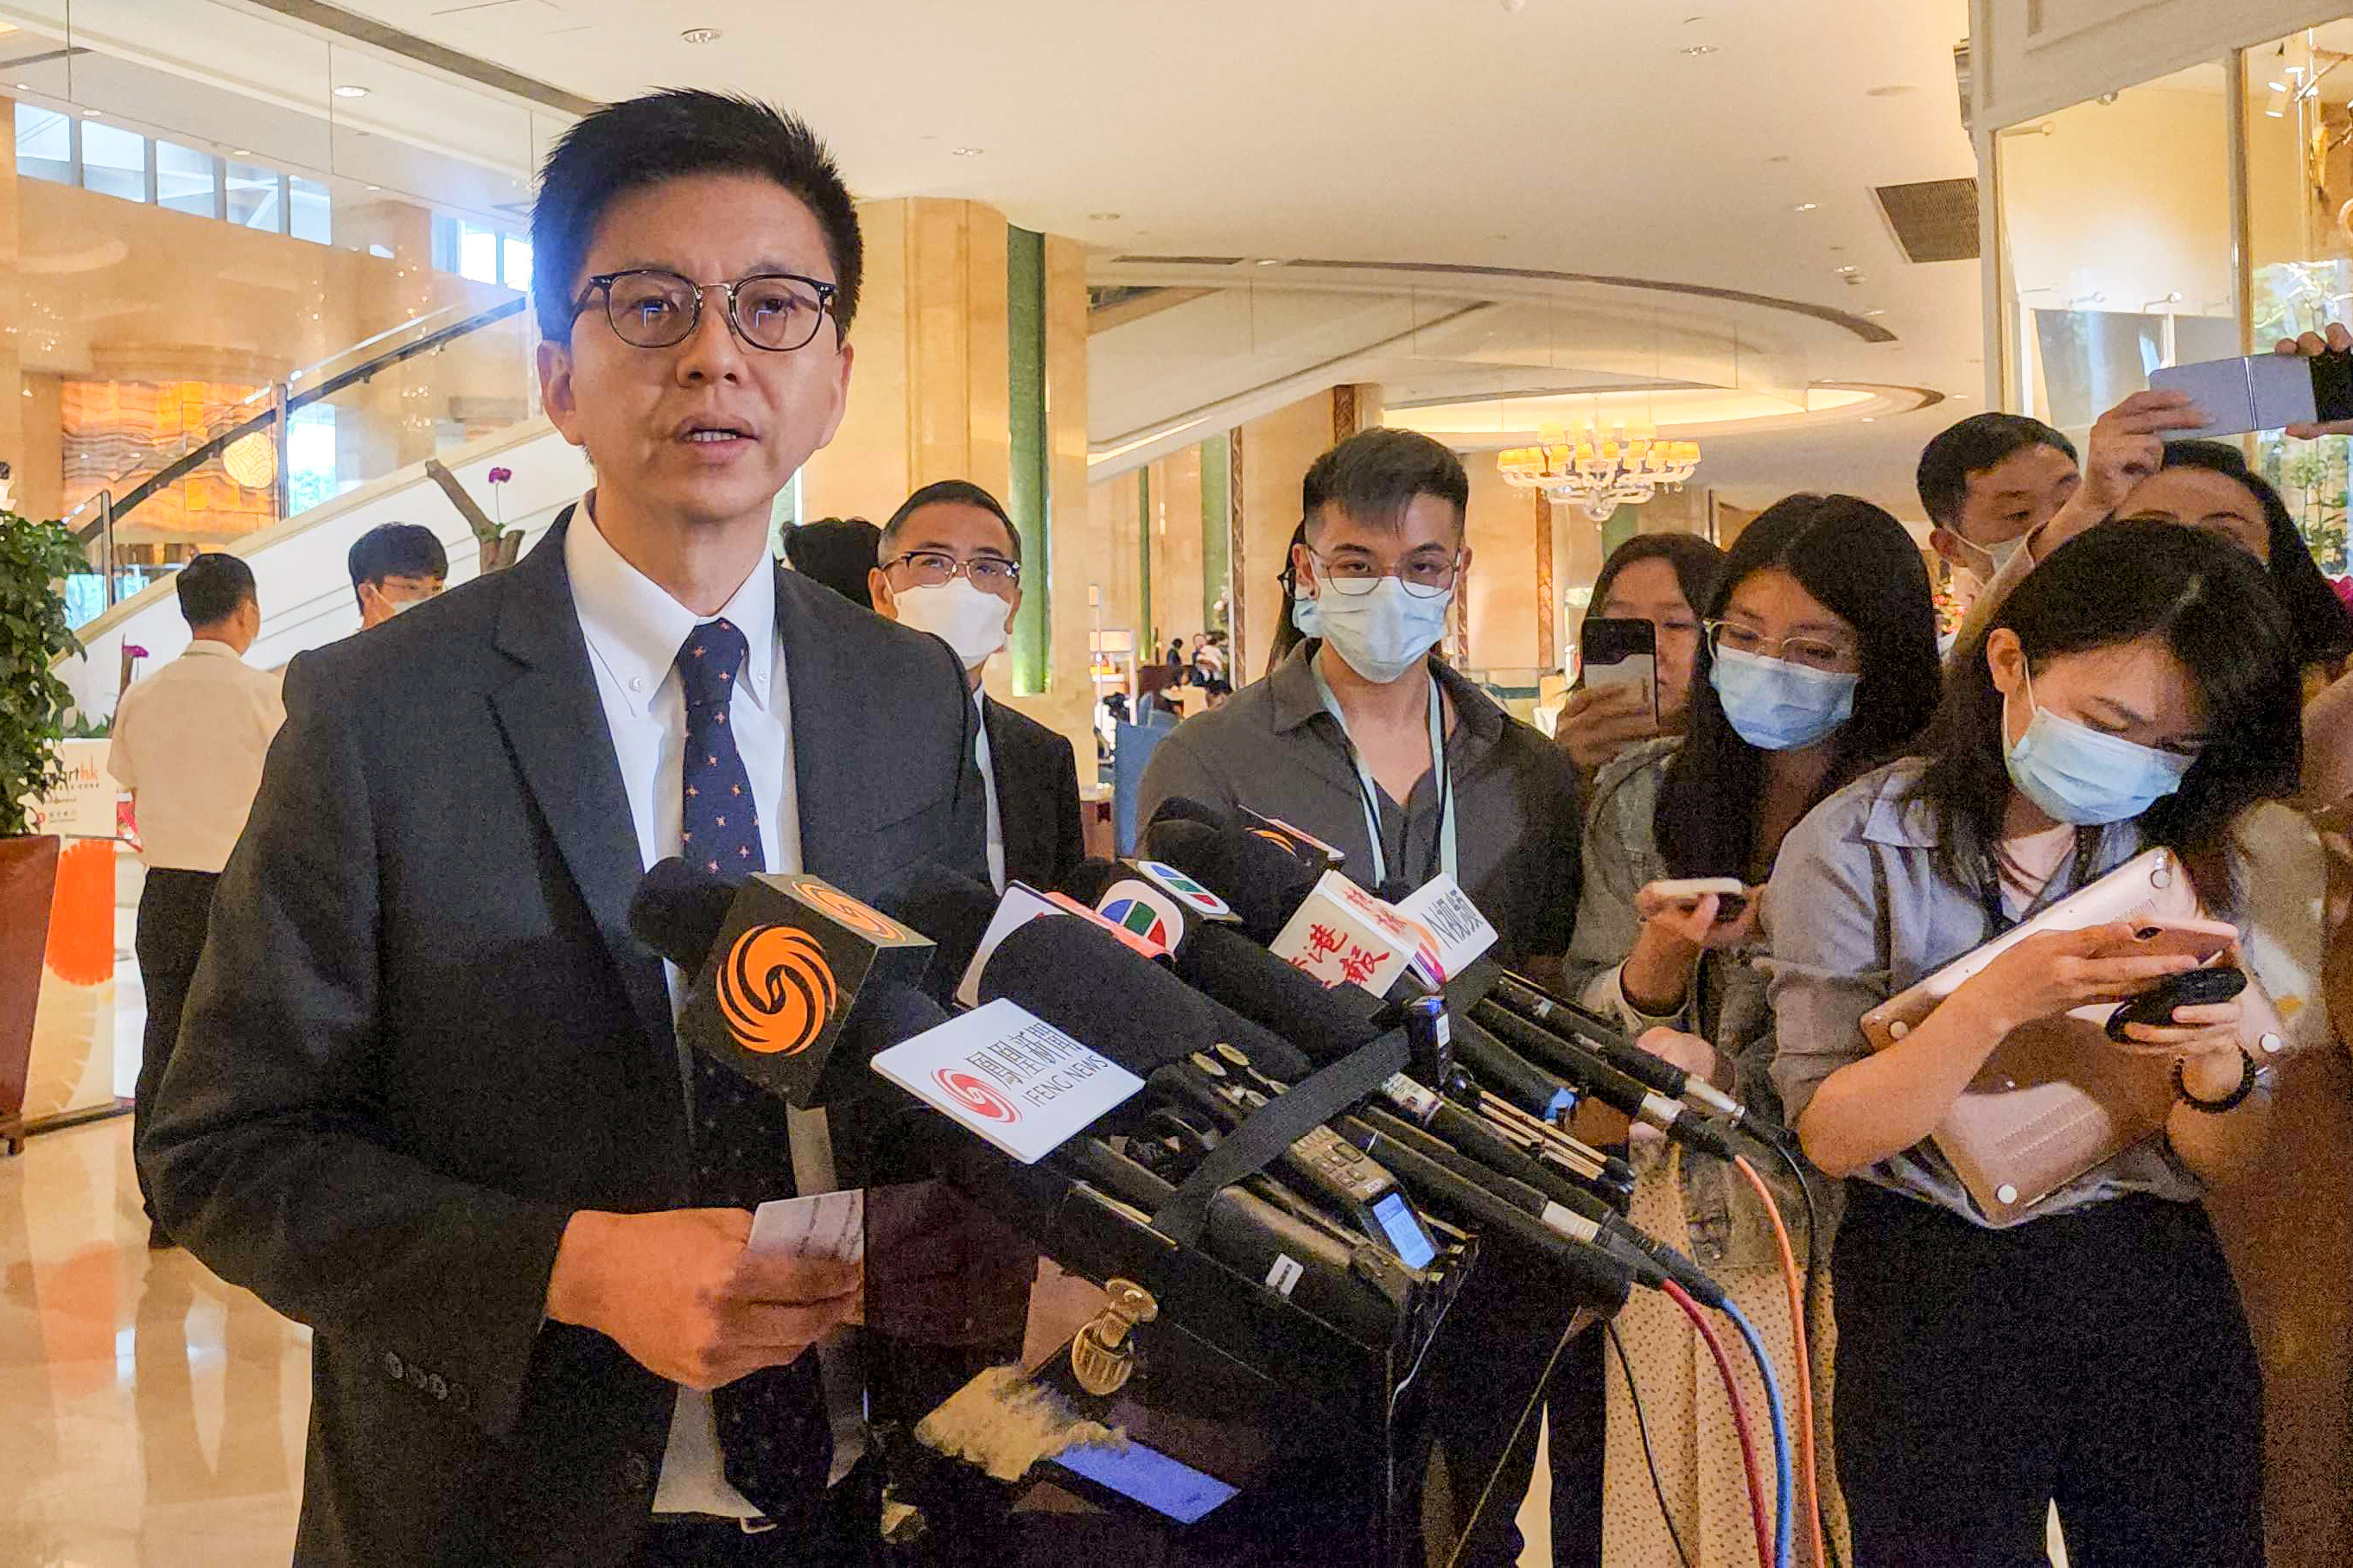 Cathay Pacific CEO Ronald Lam Siu-por has apologized for the recent discriminatory incident on one of the company’s flights from Chengdu to Hong Kong. Photo: SCMP/Iris Ouyang